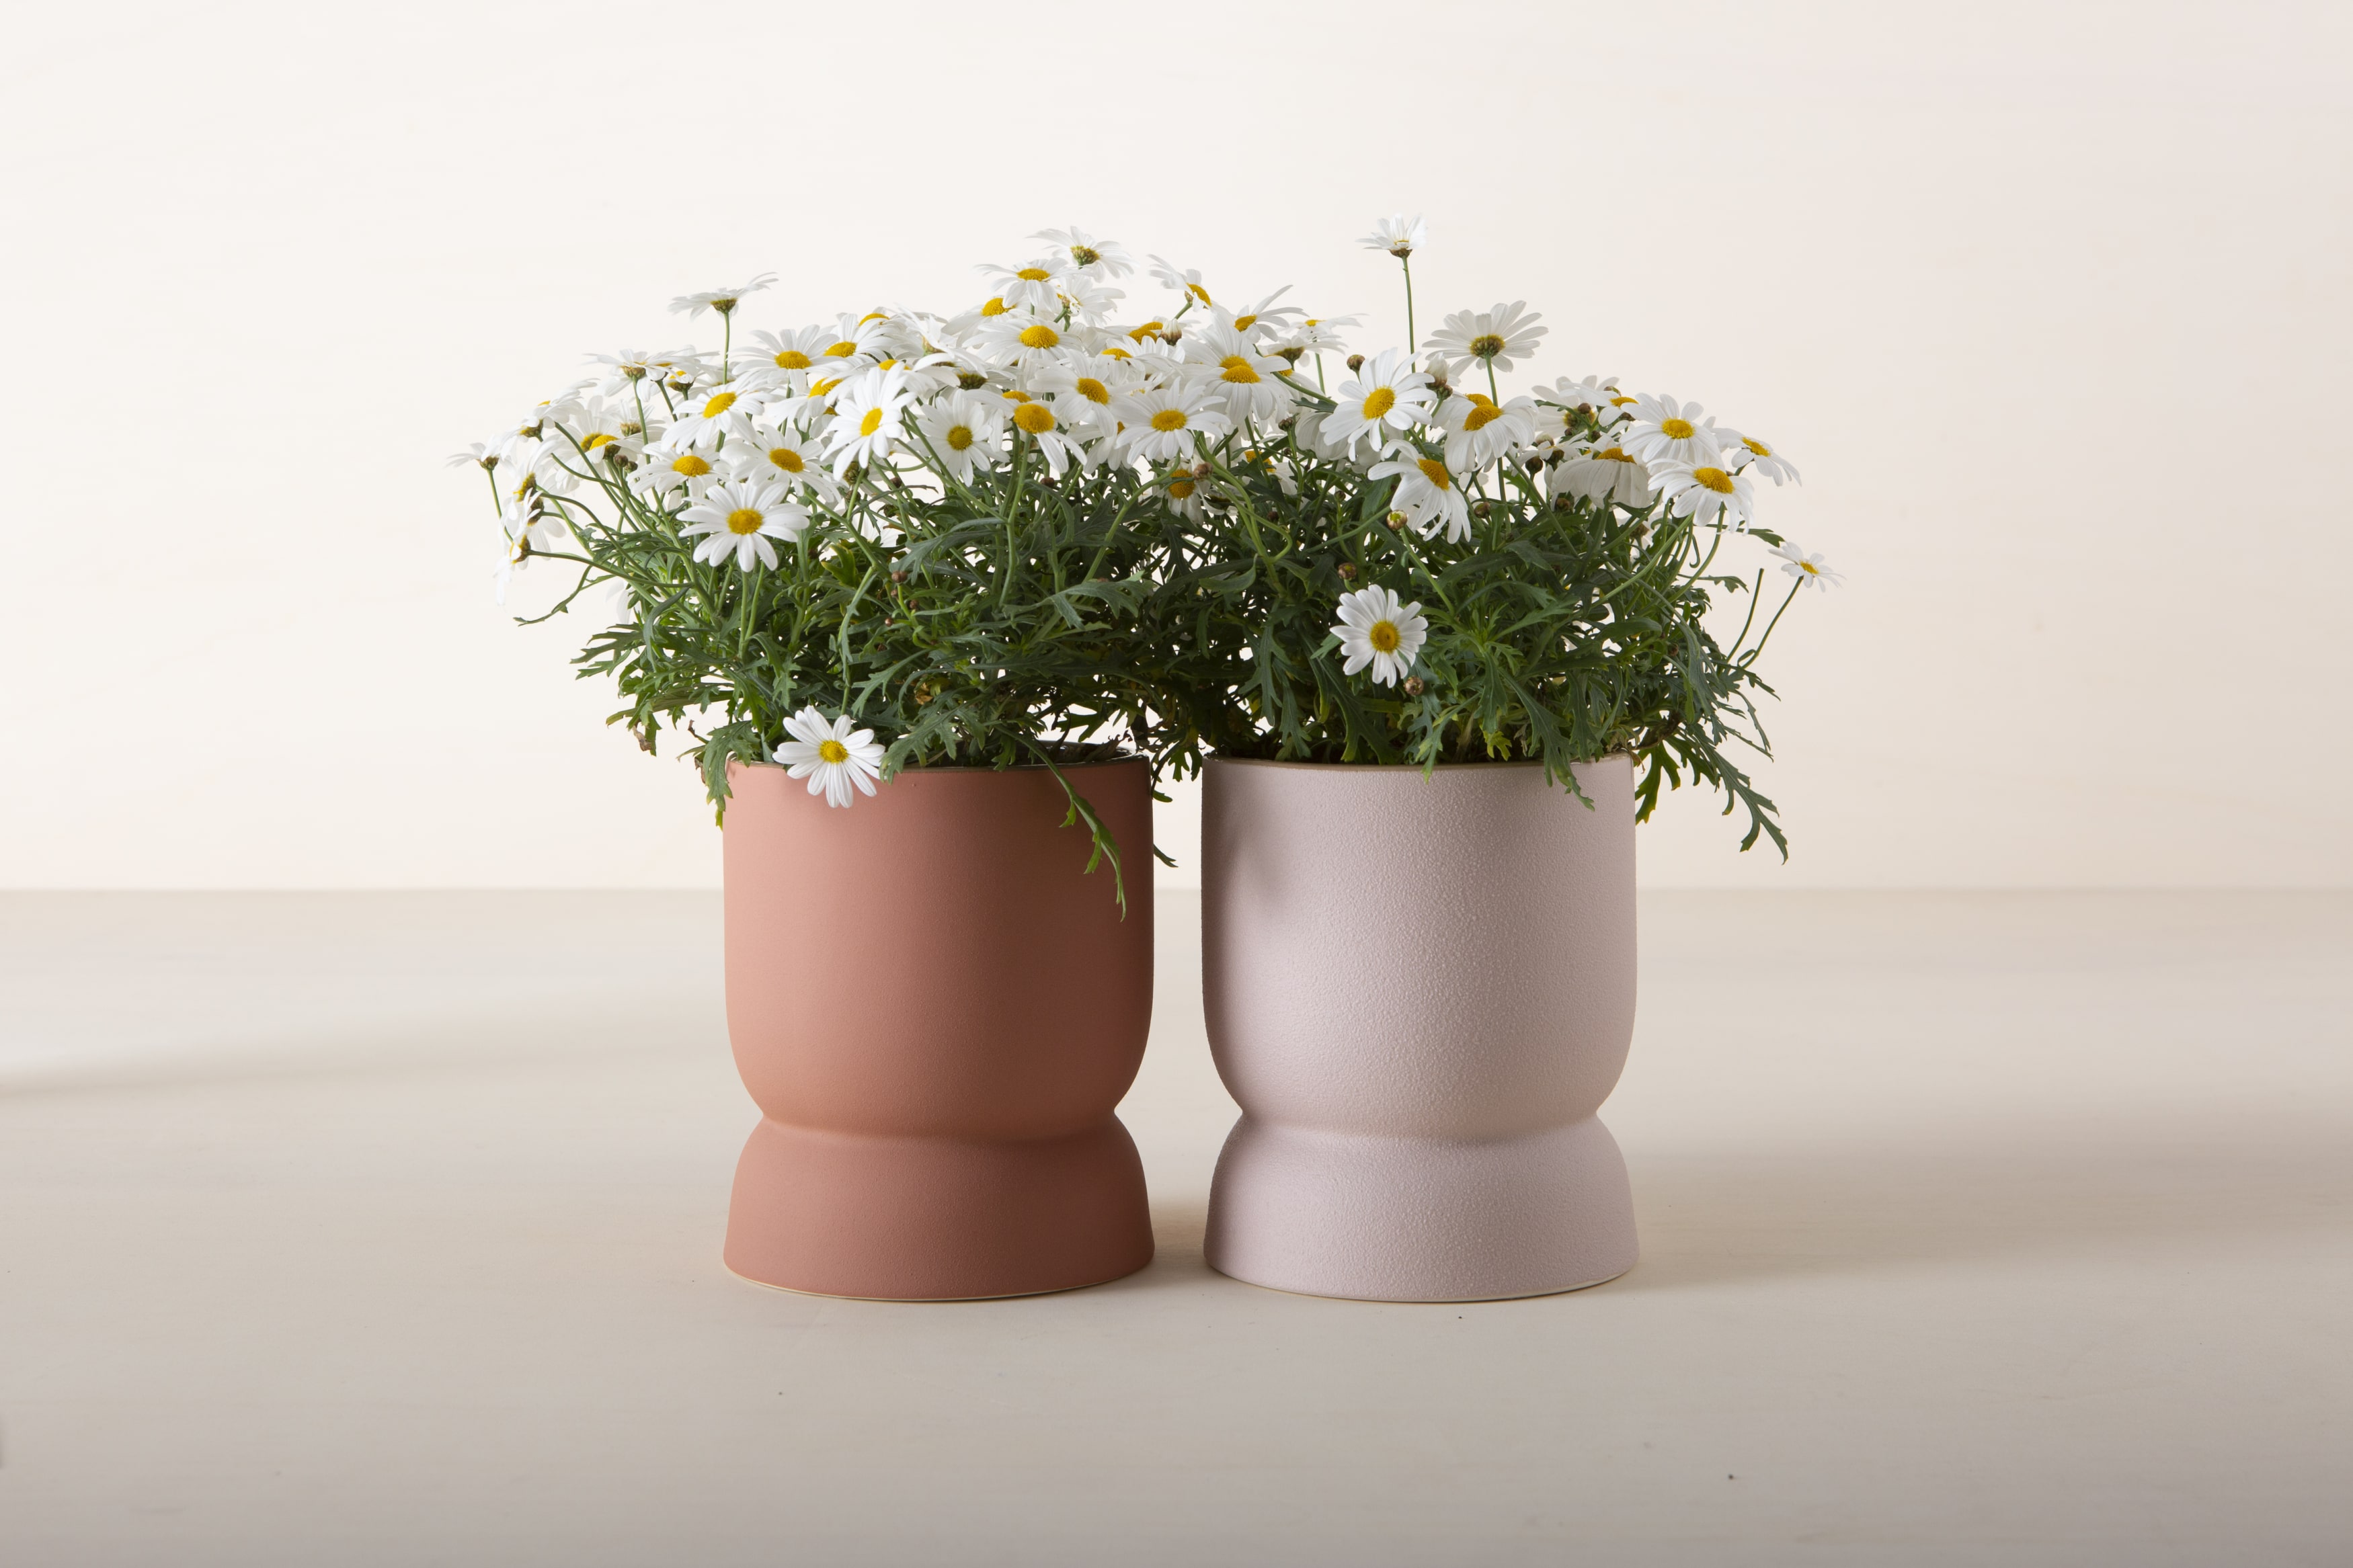  | This beautiful flower pot has an almost sculptural quality to it. The rounded shapes, the distinct colour and the textured surface make it a rustic yet elegant eye-catcher. It looks wonderful with potted or cut flowers. Or do you wanna try something different? Why not try filling them with aromatic herbs for decoration. | 